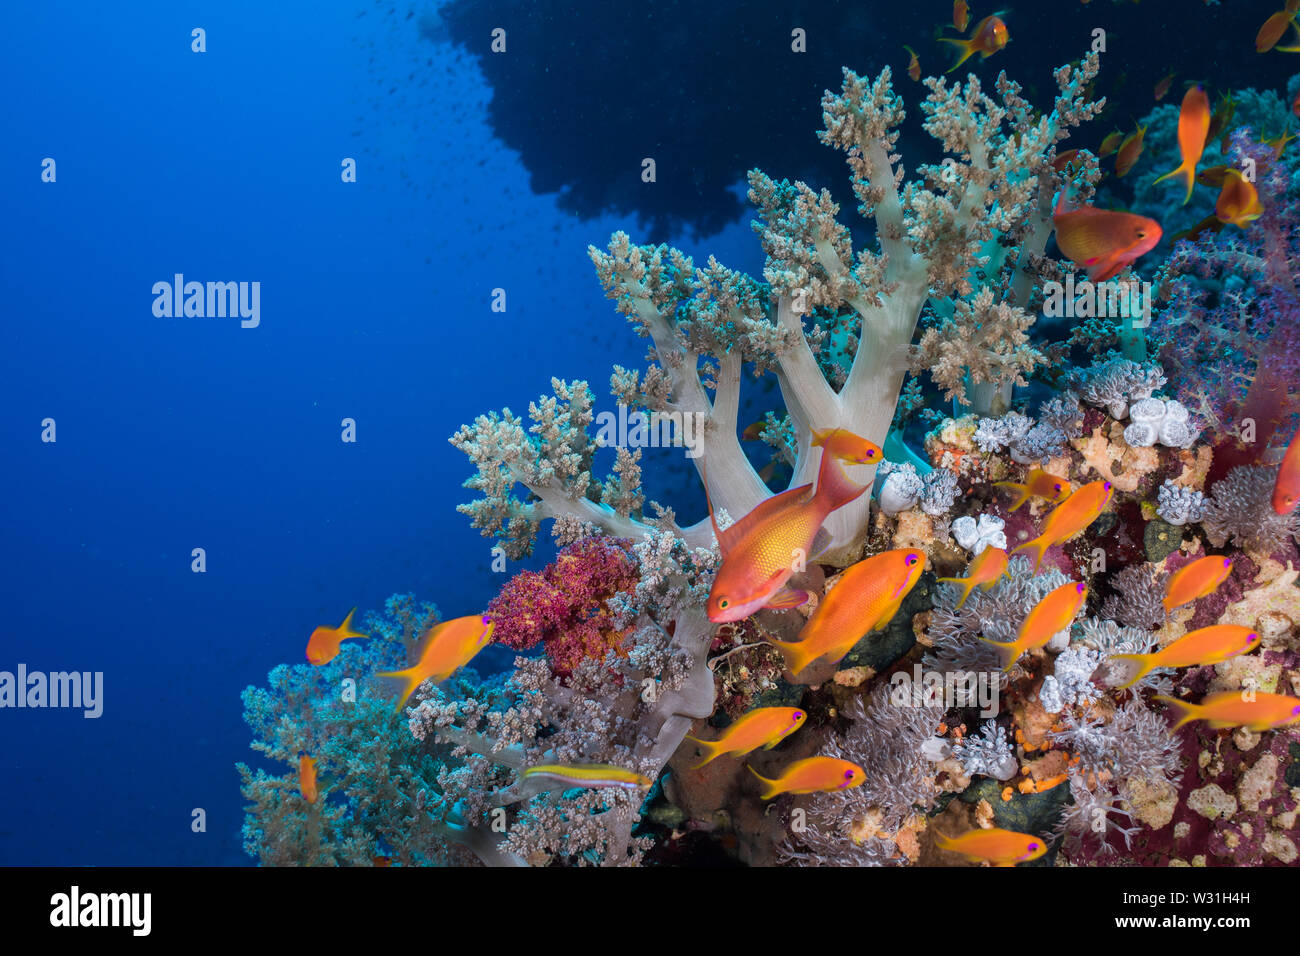 Seascape with lyretail anthias (Pseudanthias squamipinnis) fish in the foreground and a soft coral behind them. Stock Photo